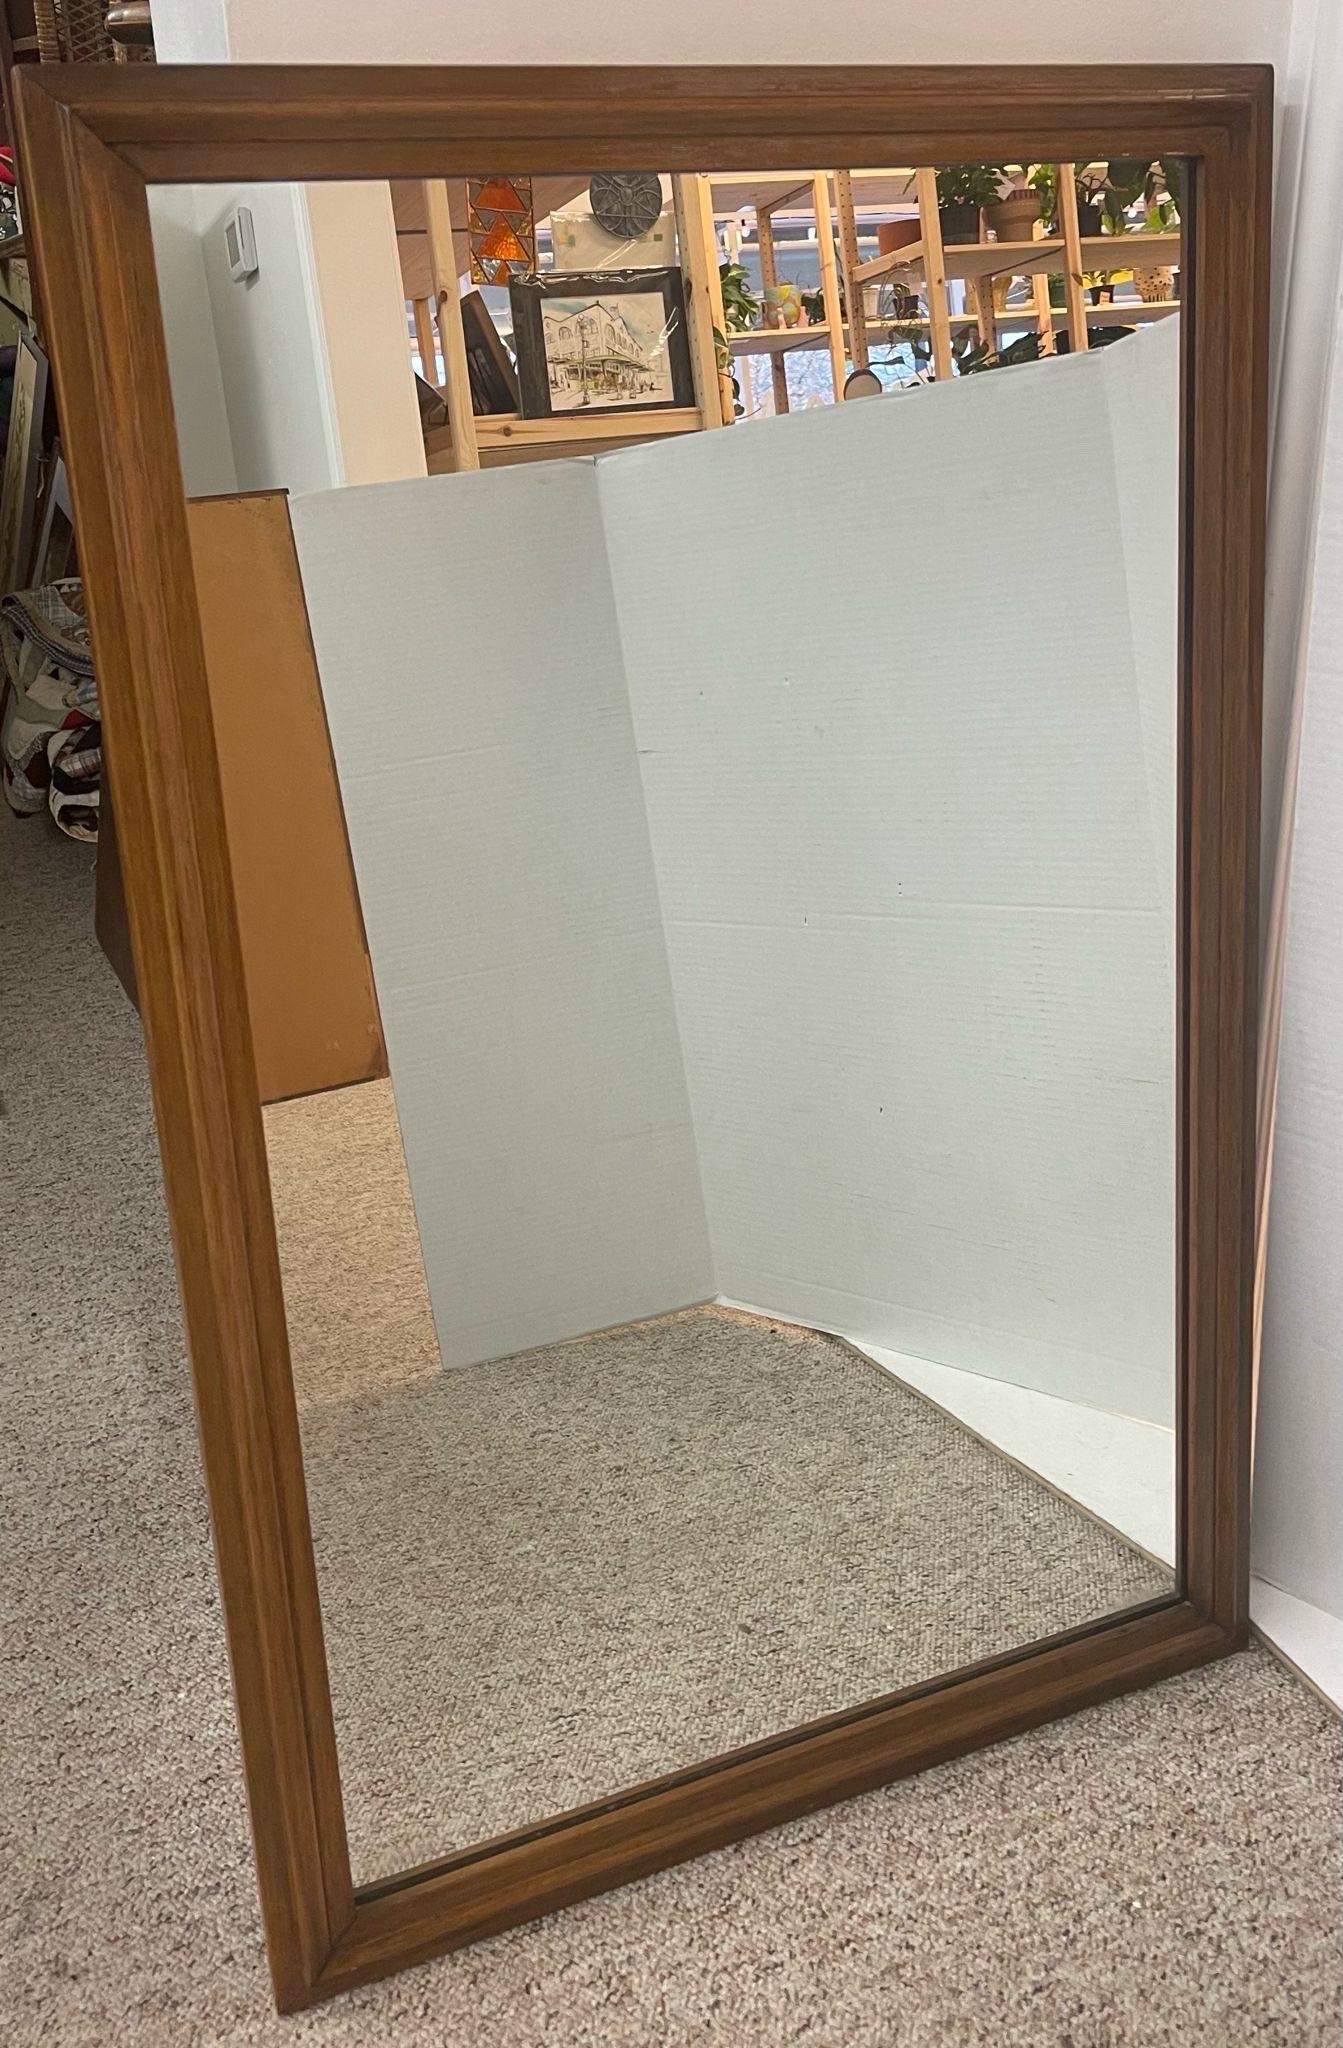 Wood Framed Mirror, No Makers Mark. Beautiful Detailing on the Frame. Vintage Condition Consistent with Age as Pictured.

Dimensions. 27 W ; 1 D ; 41 1/2 H